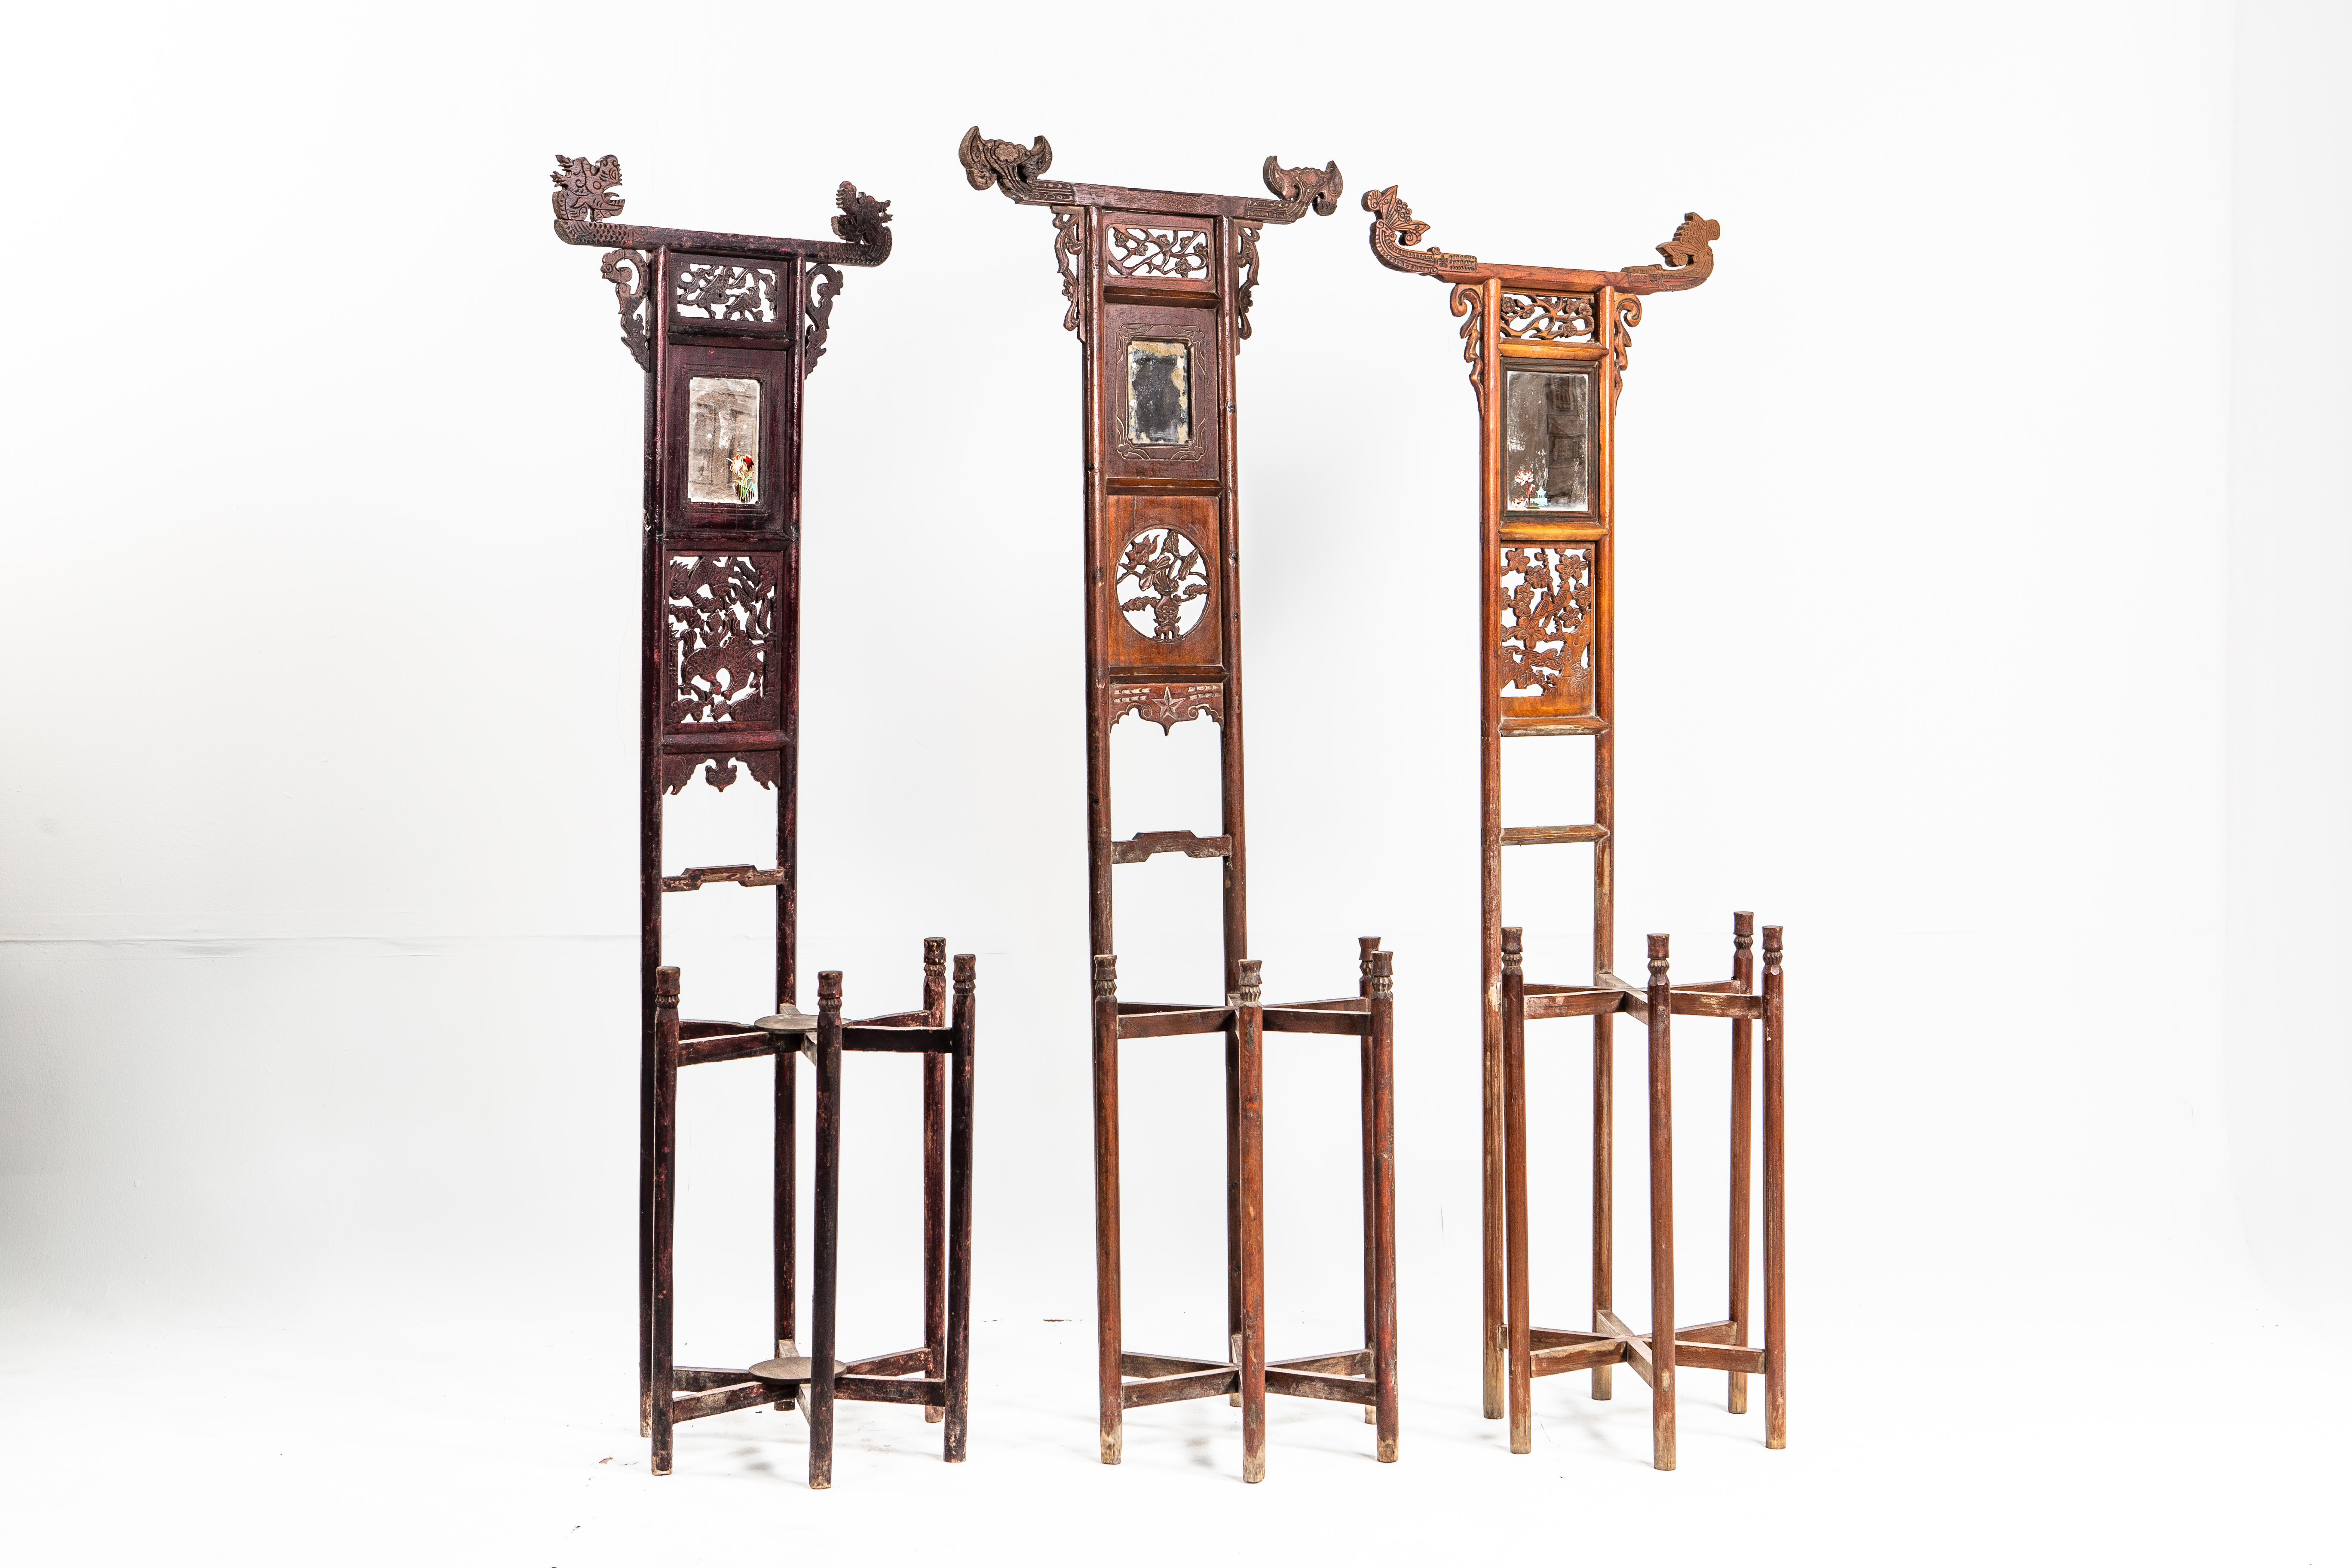 These washstands were designed to hold a brass bowl; the ends of their top rails upturned to keep towels in place. While many were plain, these pieces feature ornate carvings and paintings. These pieces date to the late-Qing Dynasty. Items are sold